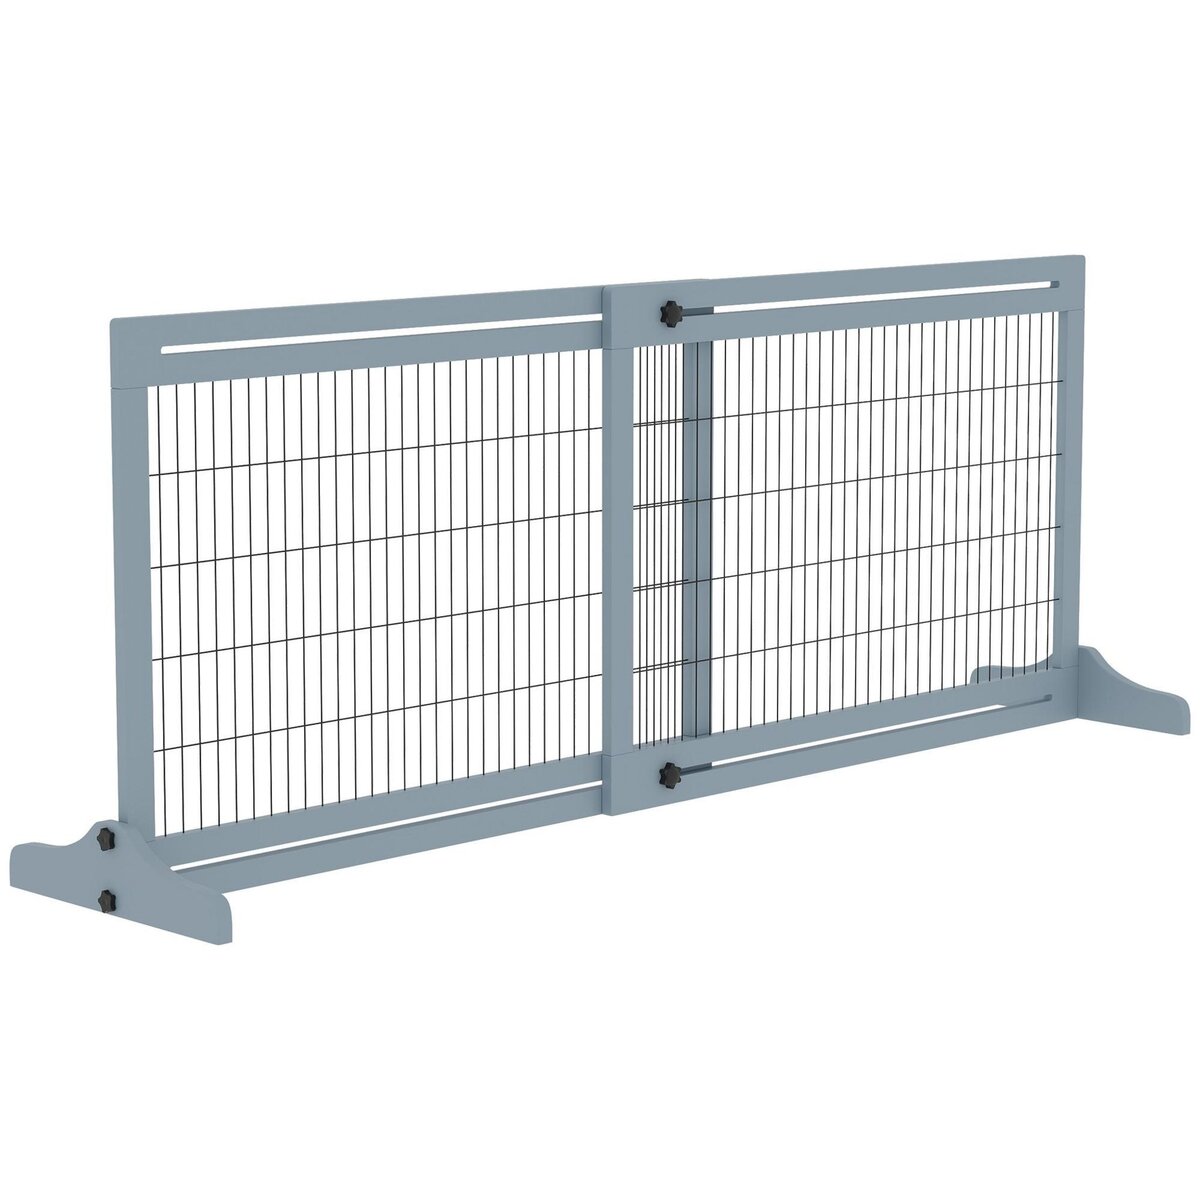 Barriere securite Barriere securite chien Barriere protection